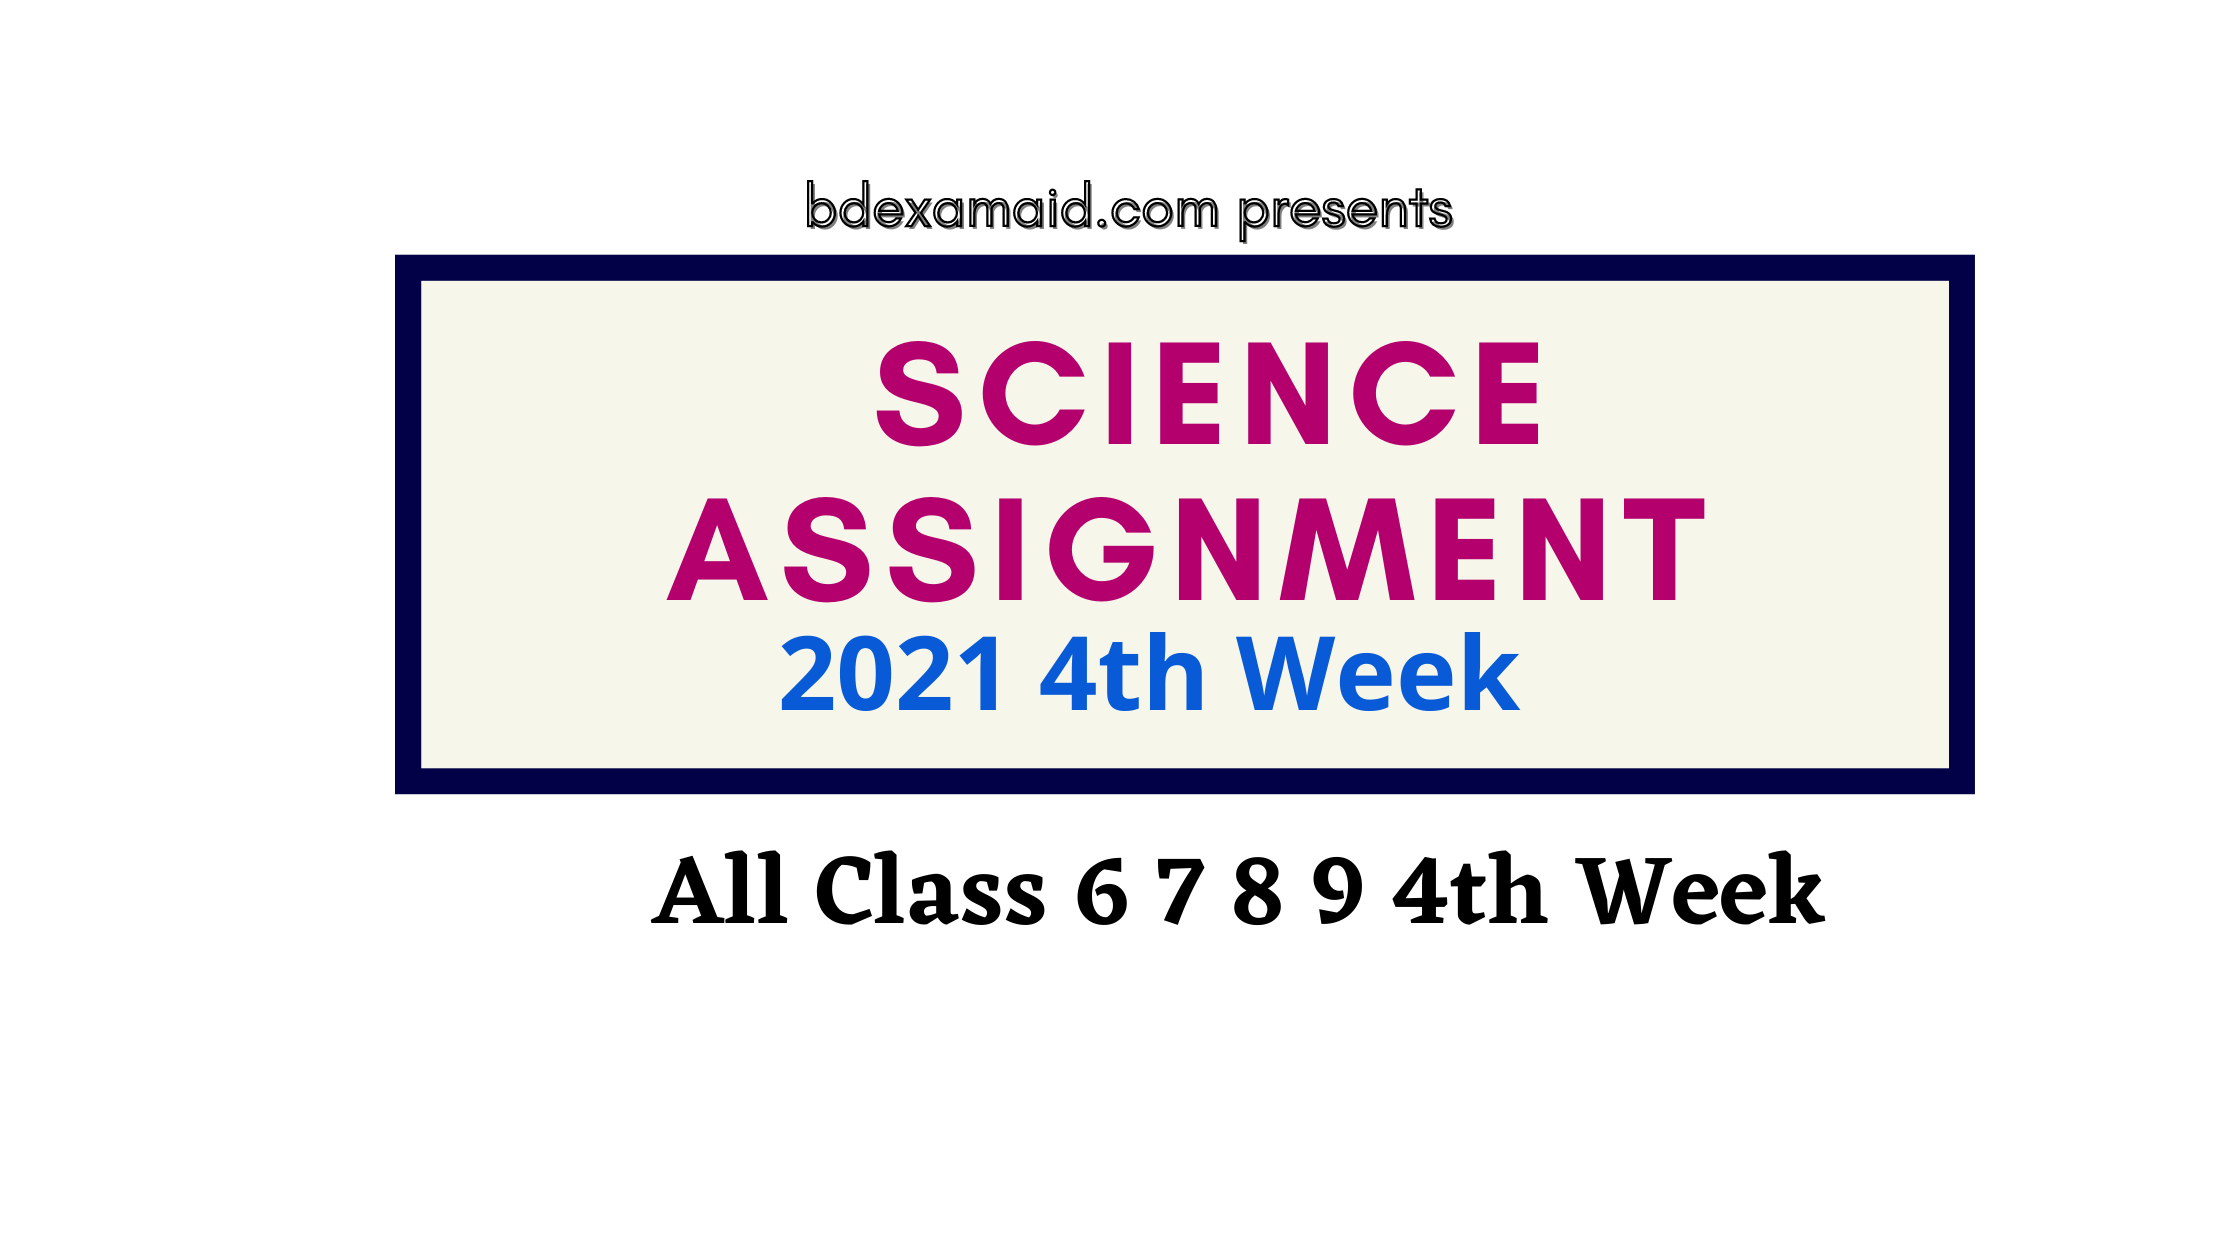 science assignment class 6 7 8 9 4th week 2021